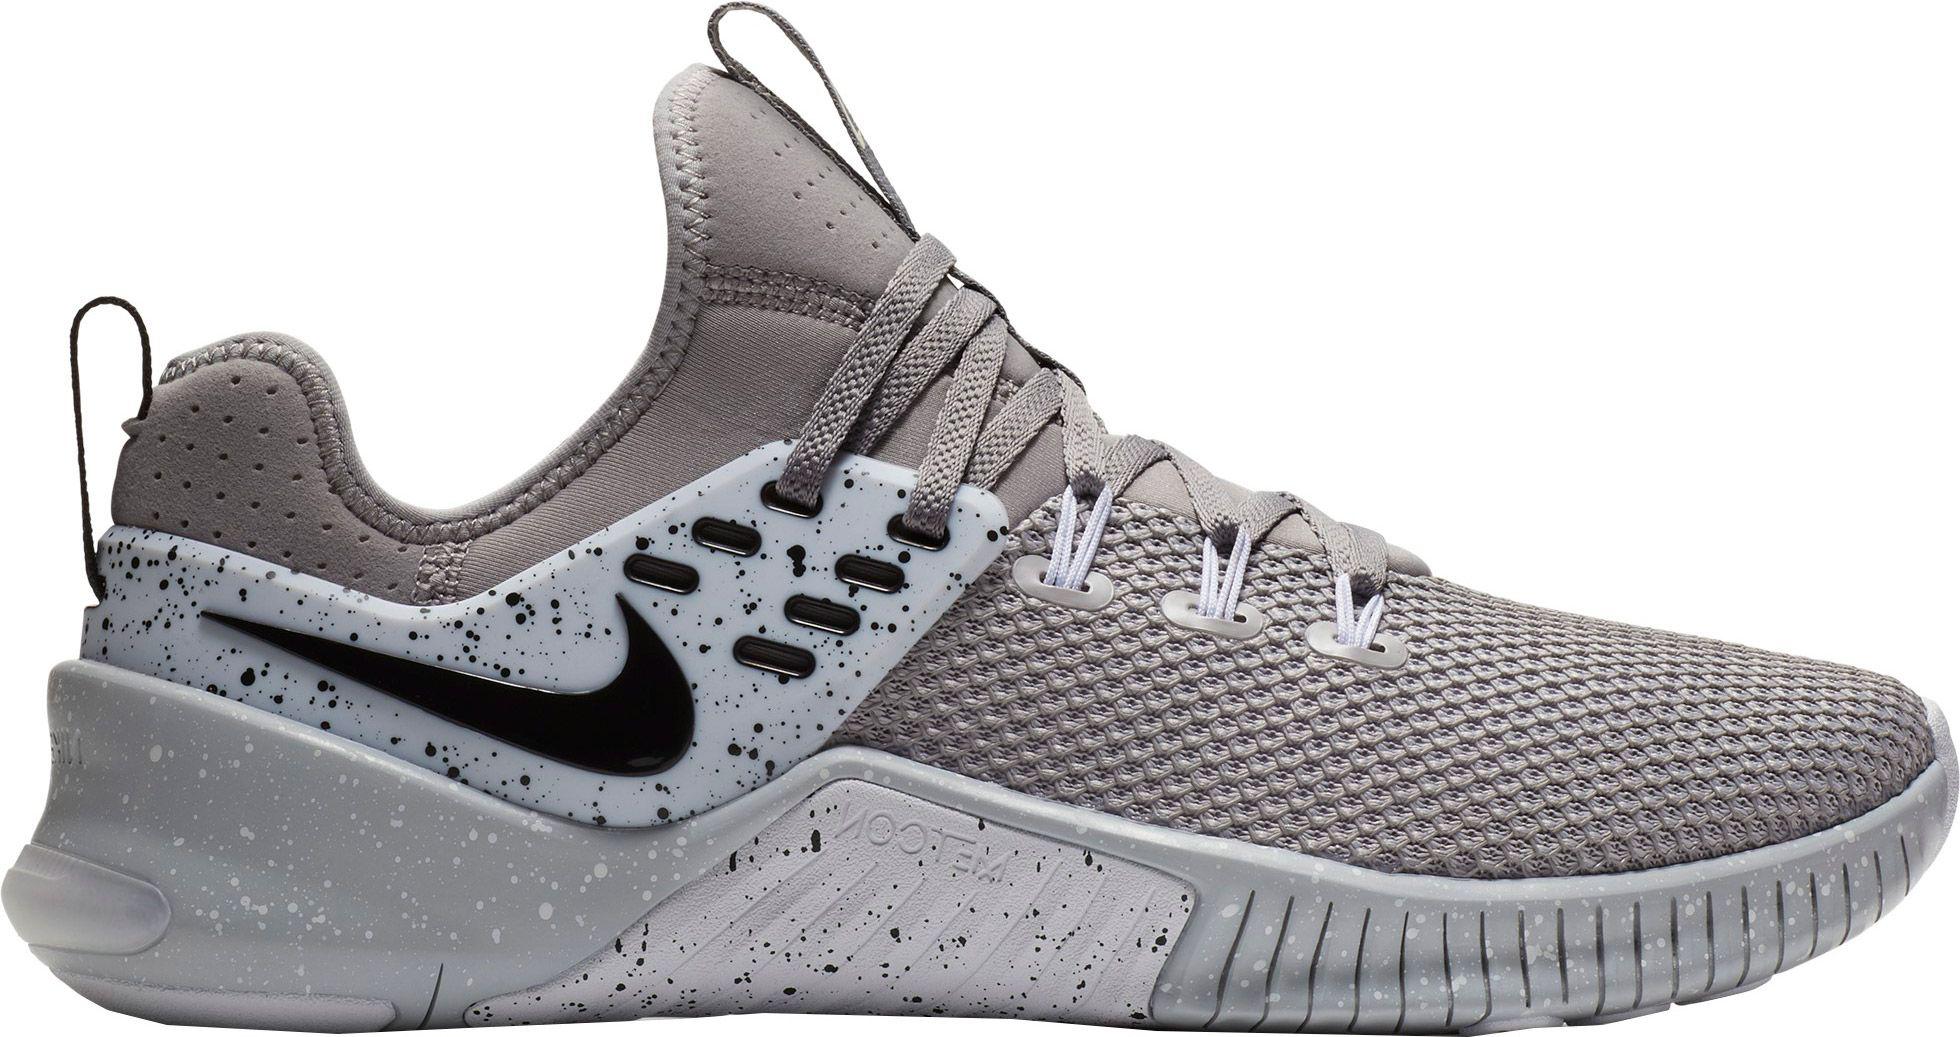 Lyst - Nike Free X Metcon Training Shoes in Gray for Men